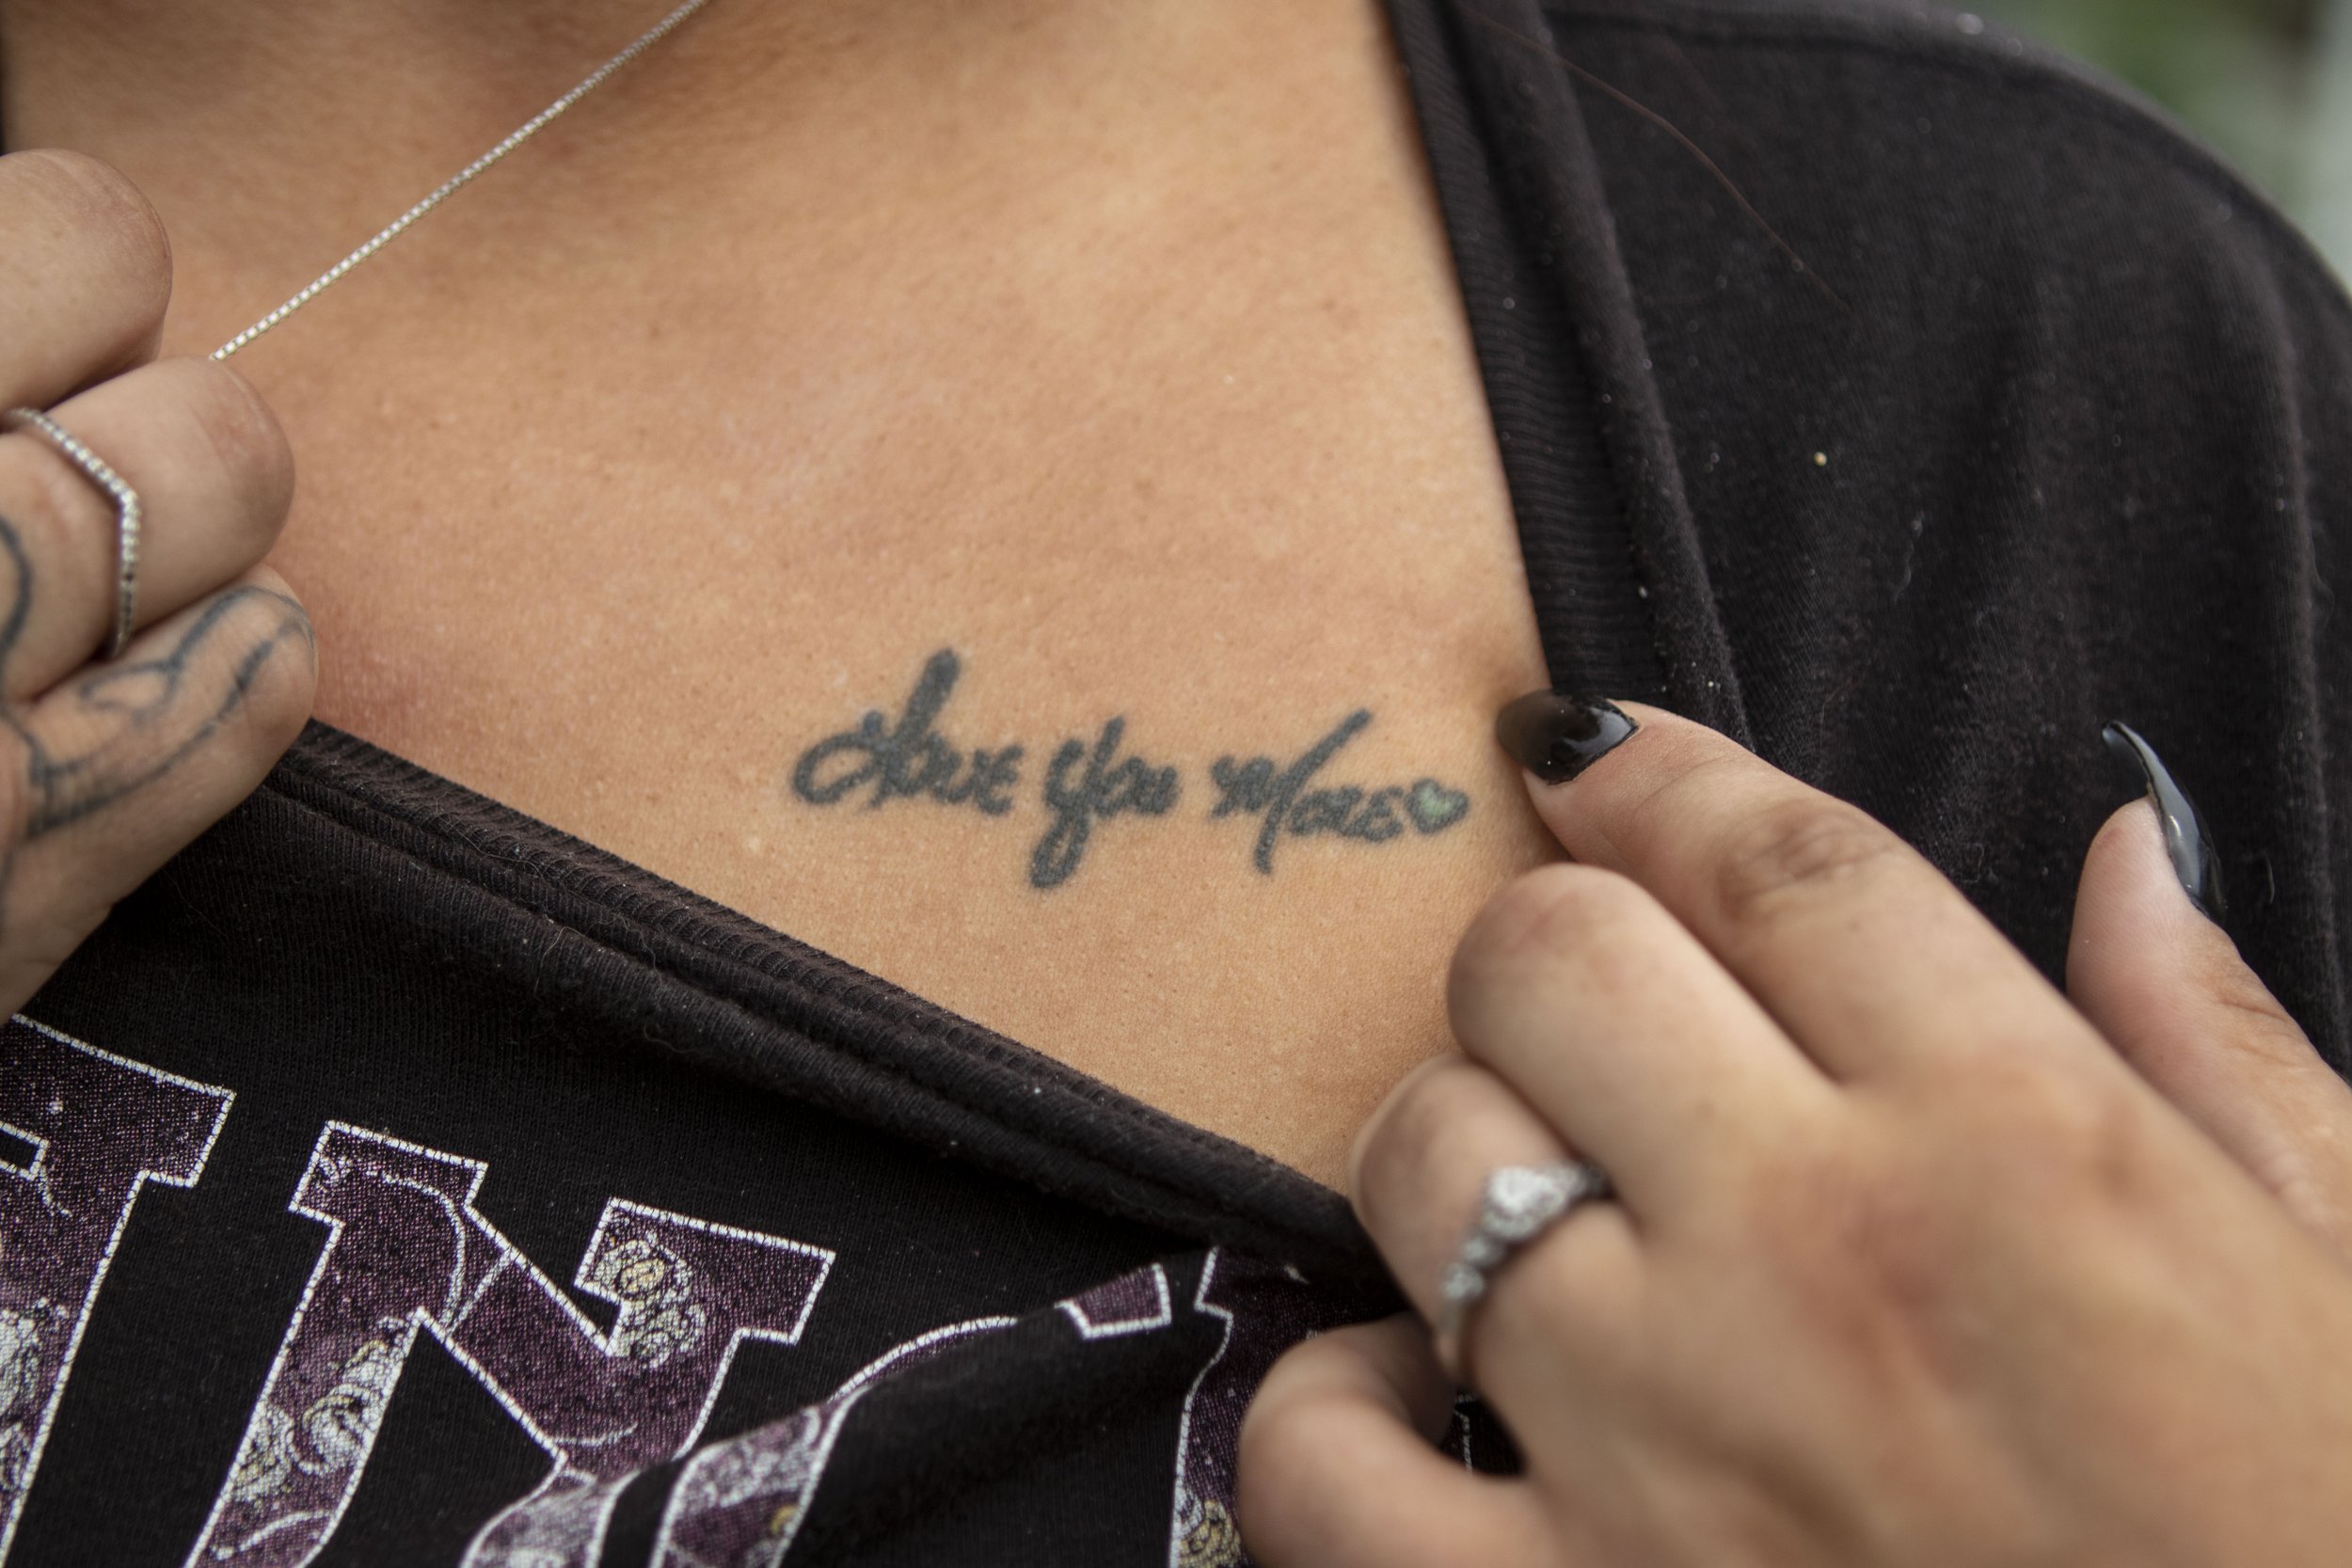  Breanna Moss, 27, displays one of her tattoos inked in her mother’s handwriting. Her mother always wanted a tattoo, but was unable to get one due to risk of infection in her later years. Breanna has several other tattoos including an anchor design f